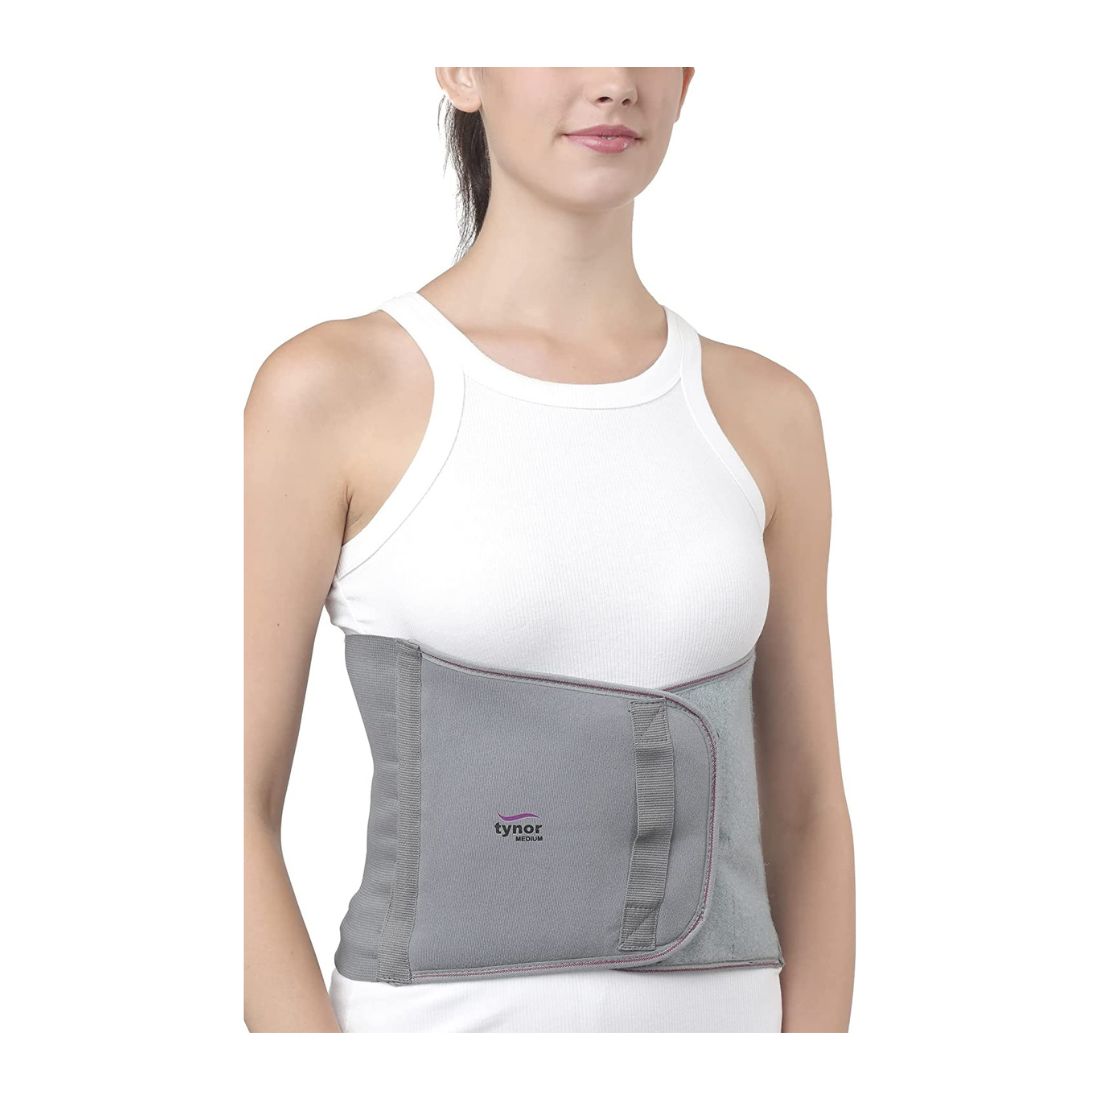 Buy abdominal support for best price in India